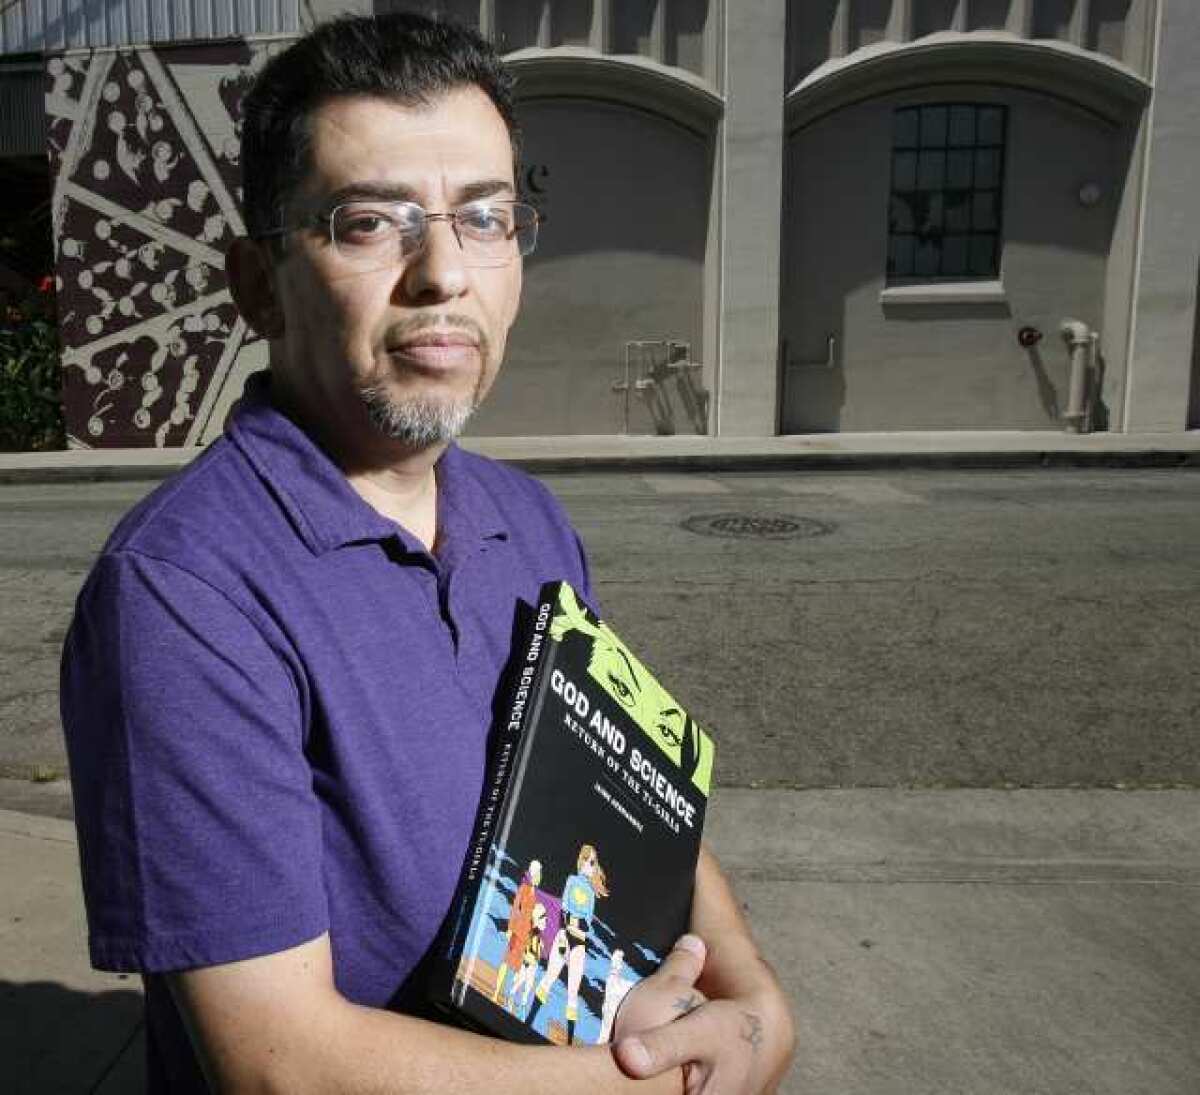 Comic book illustrator Jaime Hernandez, with his new book 'God and Science: Return of the Ti-Girls,' in Glendale.